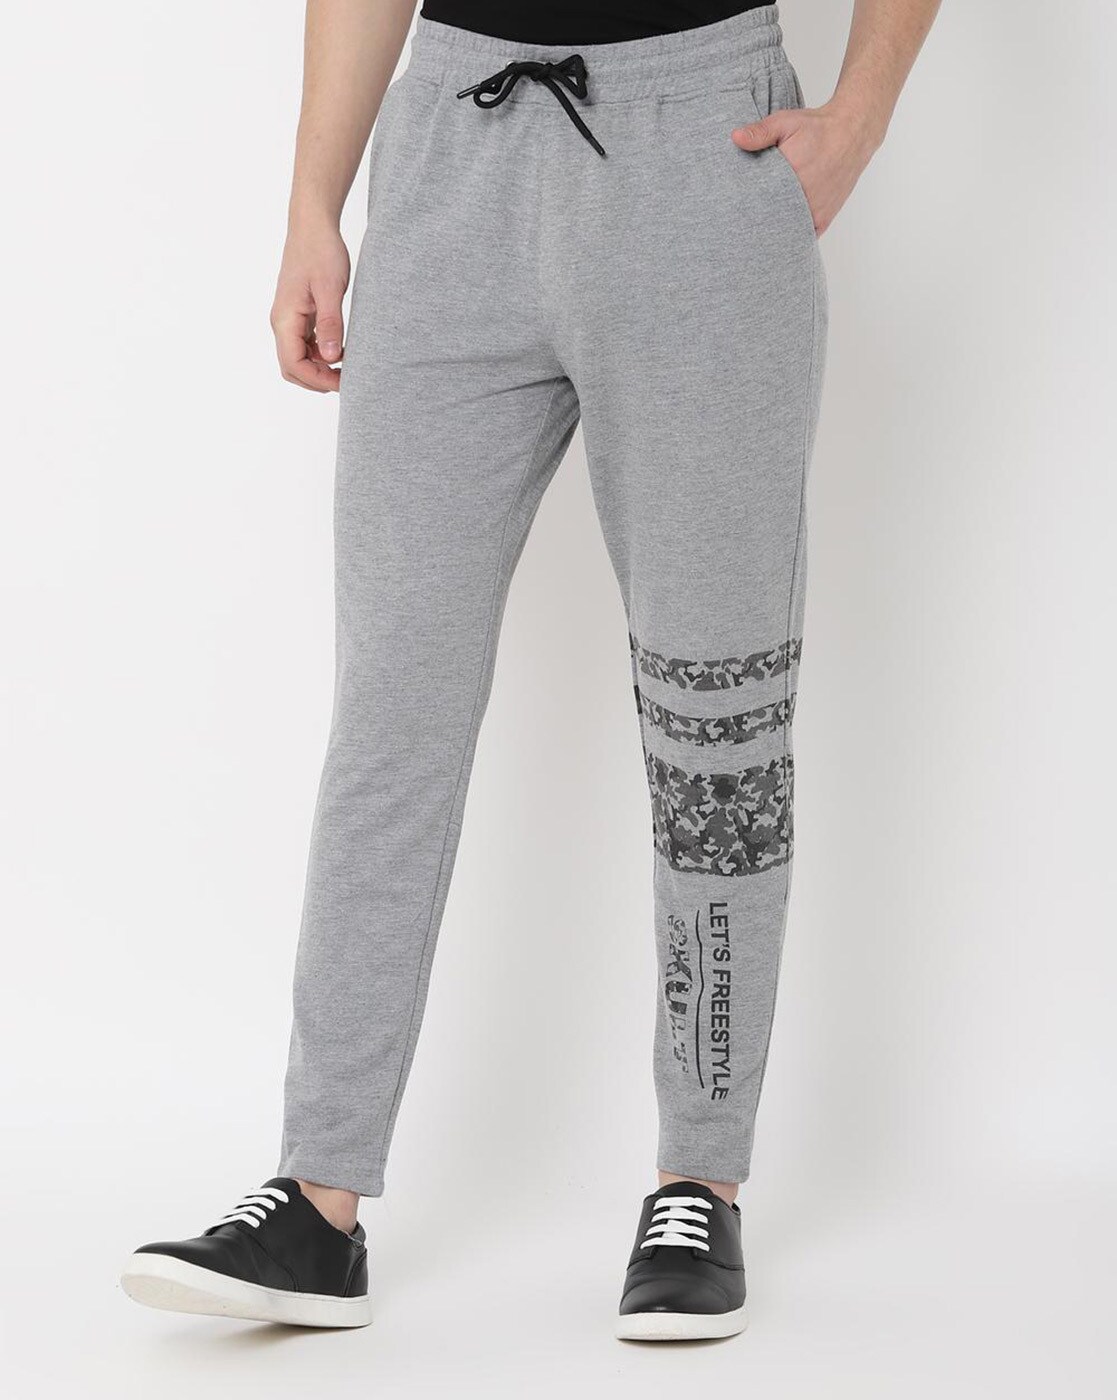 Buy SKULT by Shahid Kapoor Men Regular Fit Olive Joggers Online at Low  Prices in India - Paytmmall.com